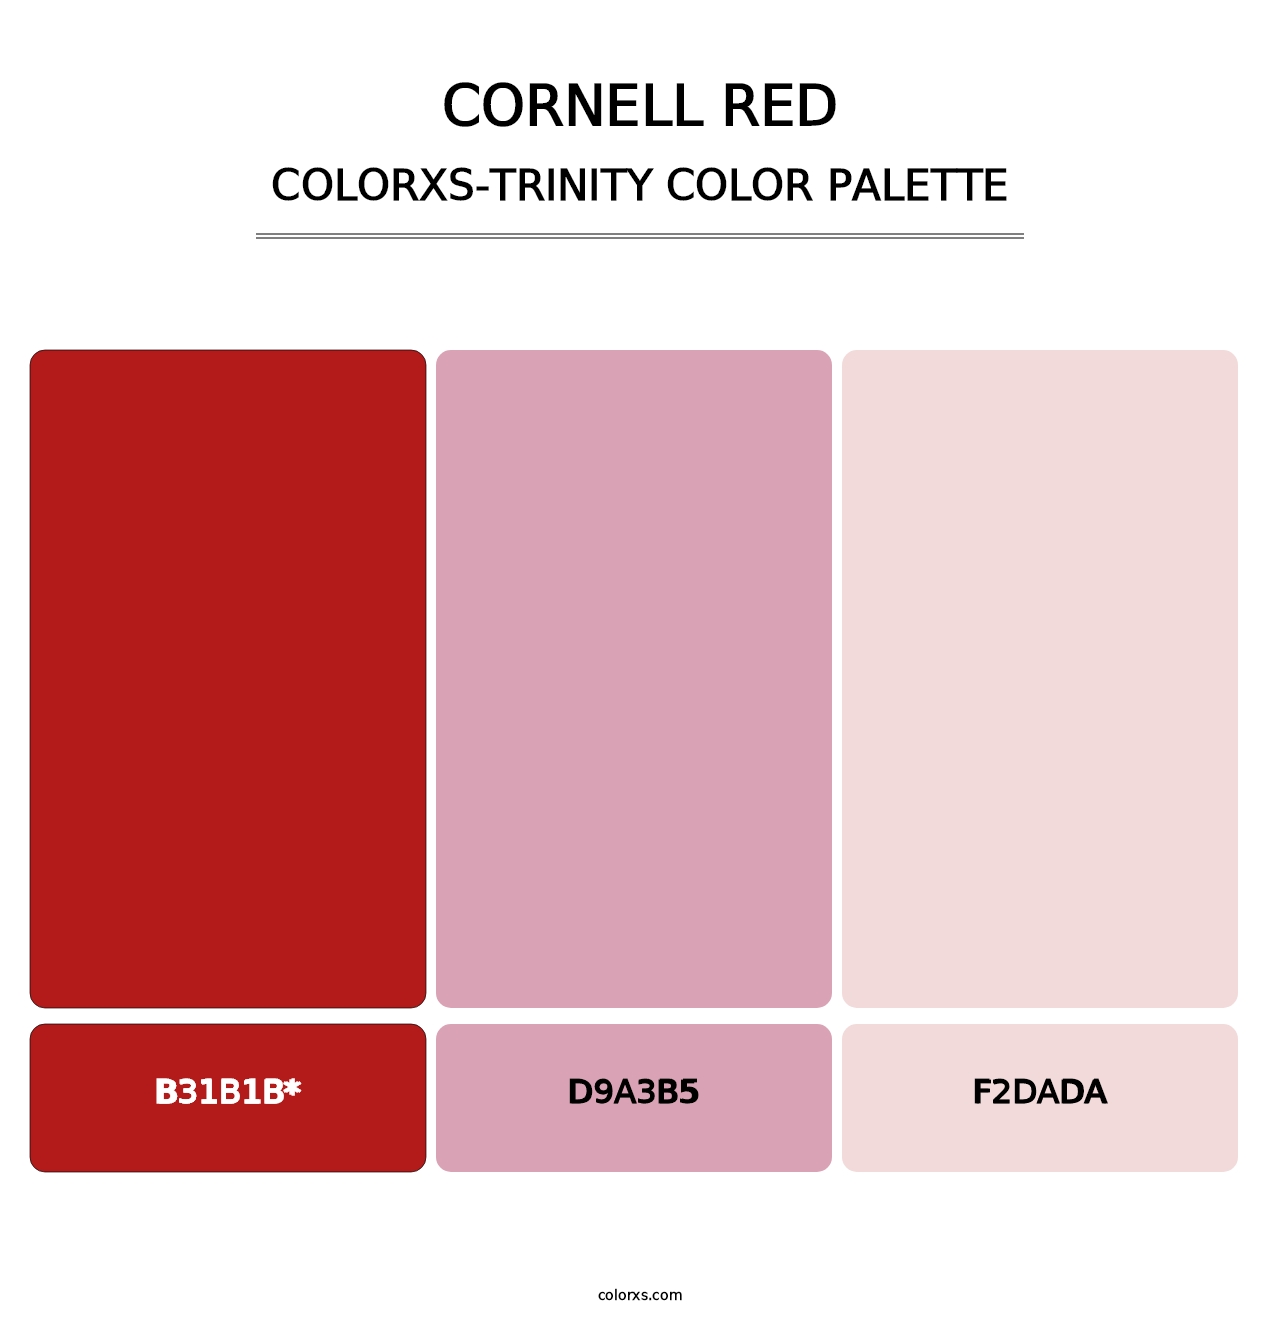 Cornell Red - Colorxs Trinity Palette